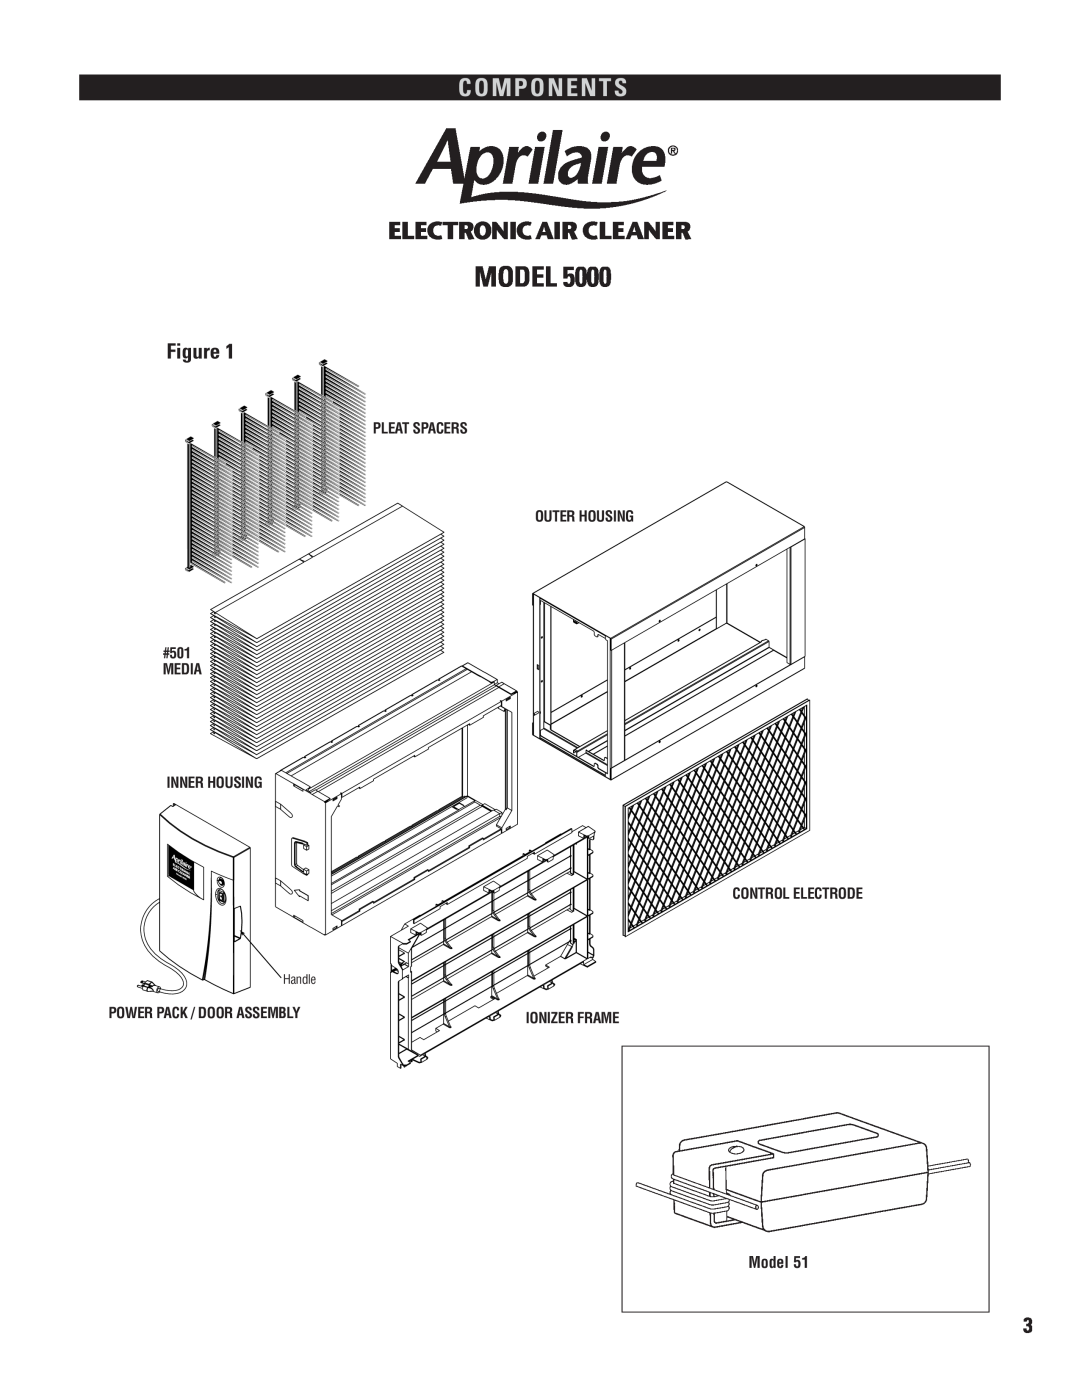 Aprilaire 5000 Components, Model, Electronic Air Cleaner, PLEAT SPACERS OUTER HOUSING #501 MEDIA, Handle, Ionizer Frame 